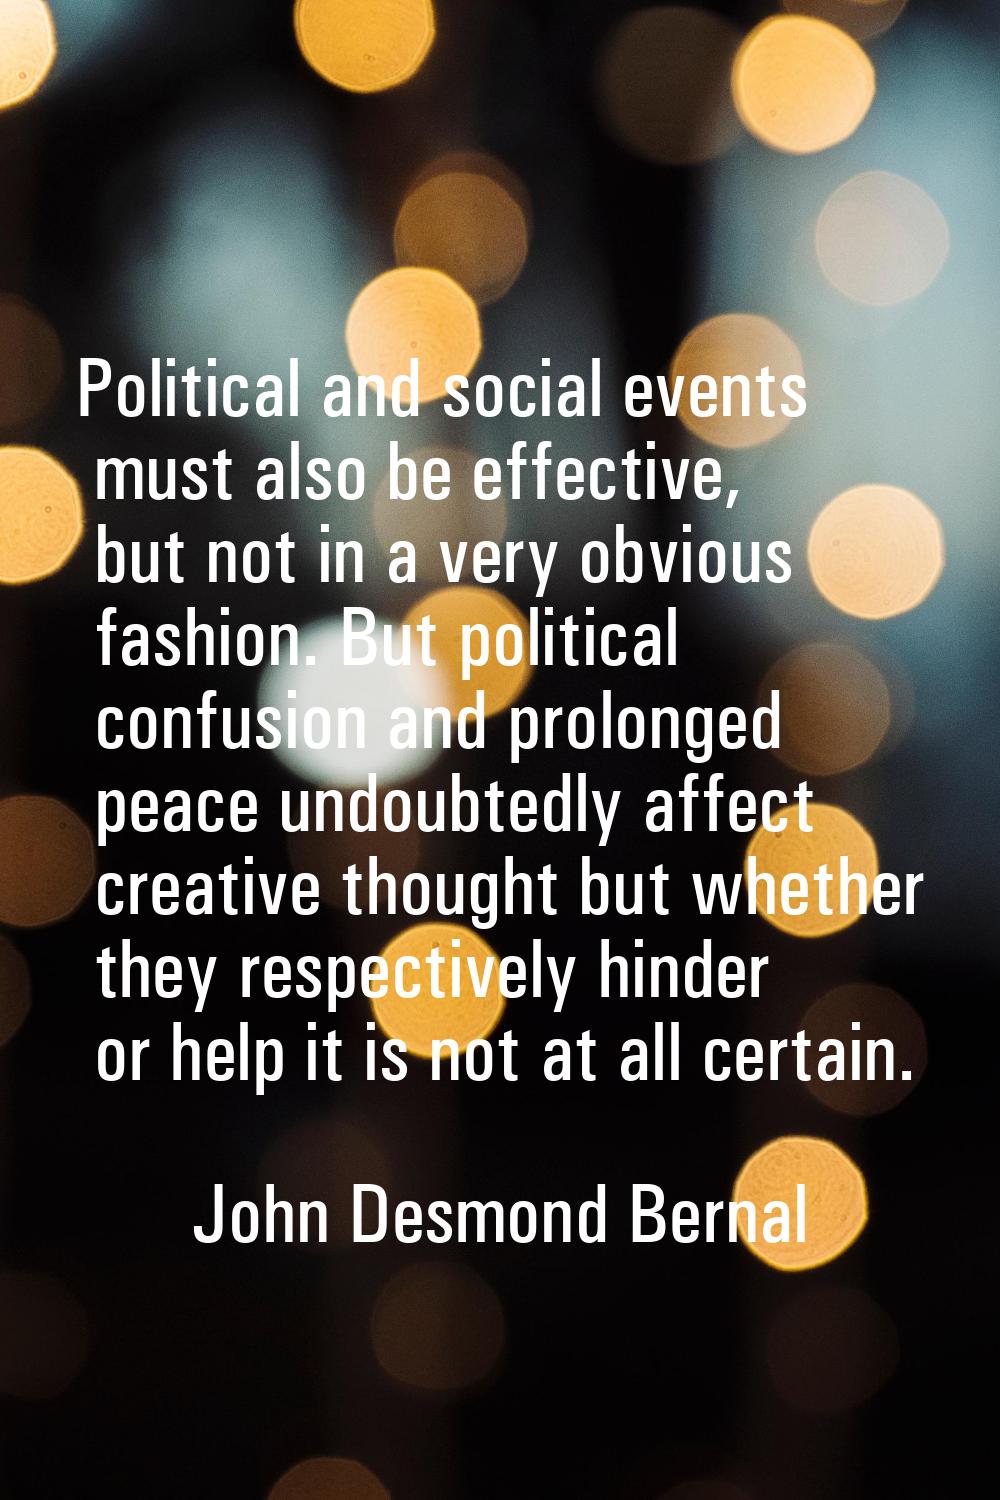 Political and social events must also be effective, but not in a very obvious fashion. But politica